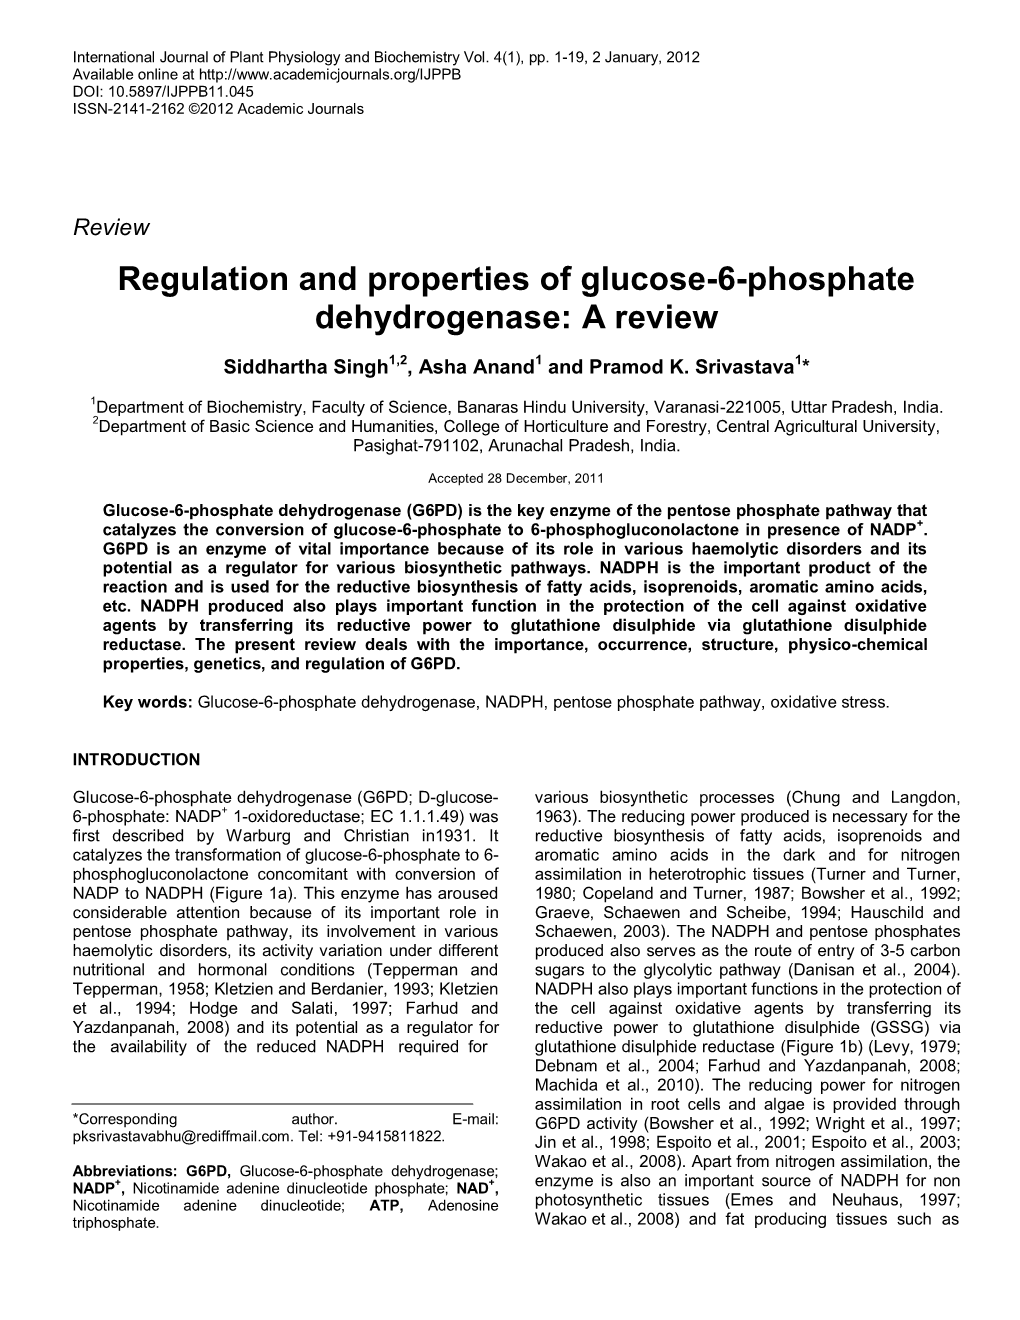 Regulation and Properties of Glucose-6-Phosphate Dehydrogenase: a Review